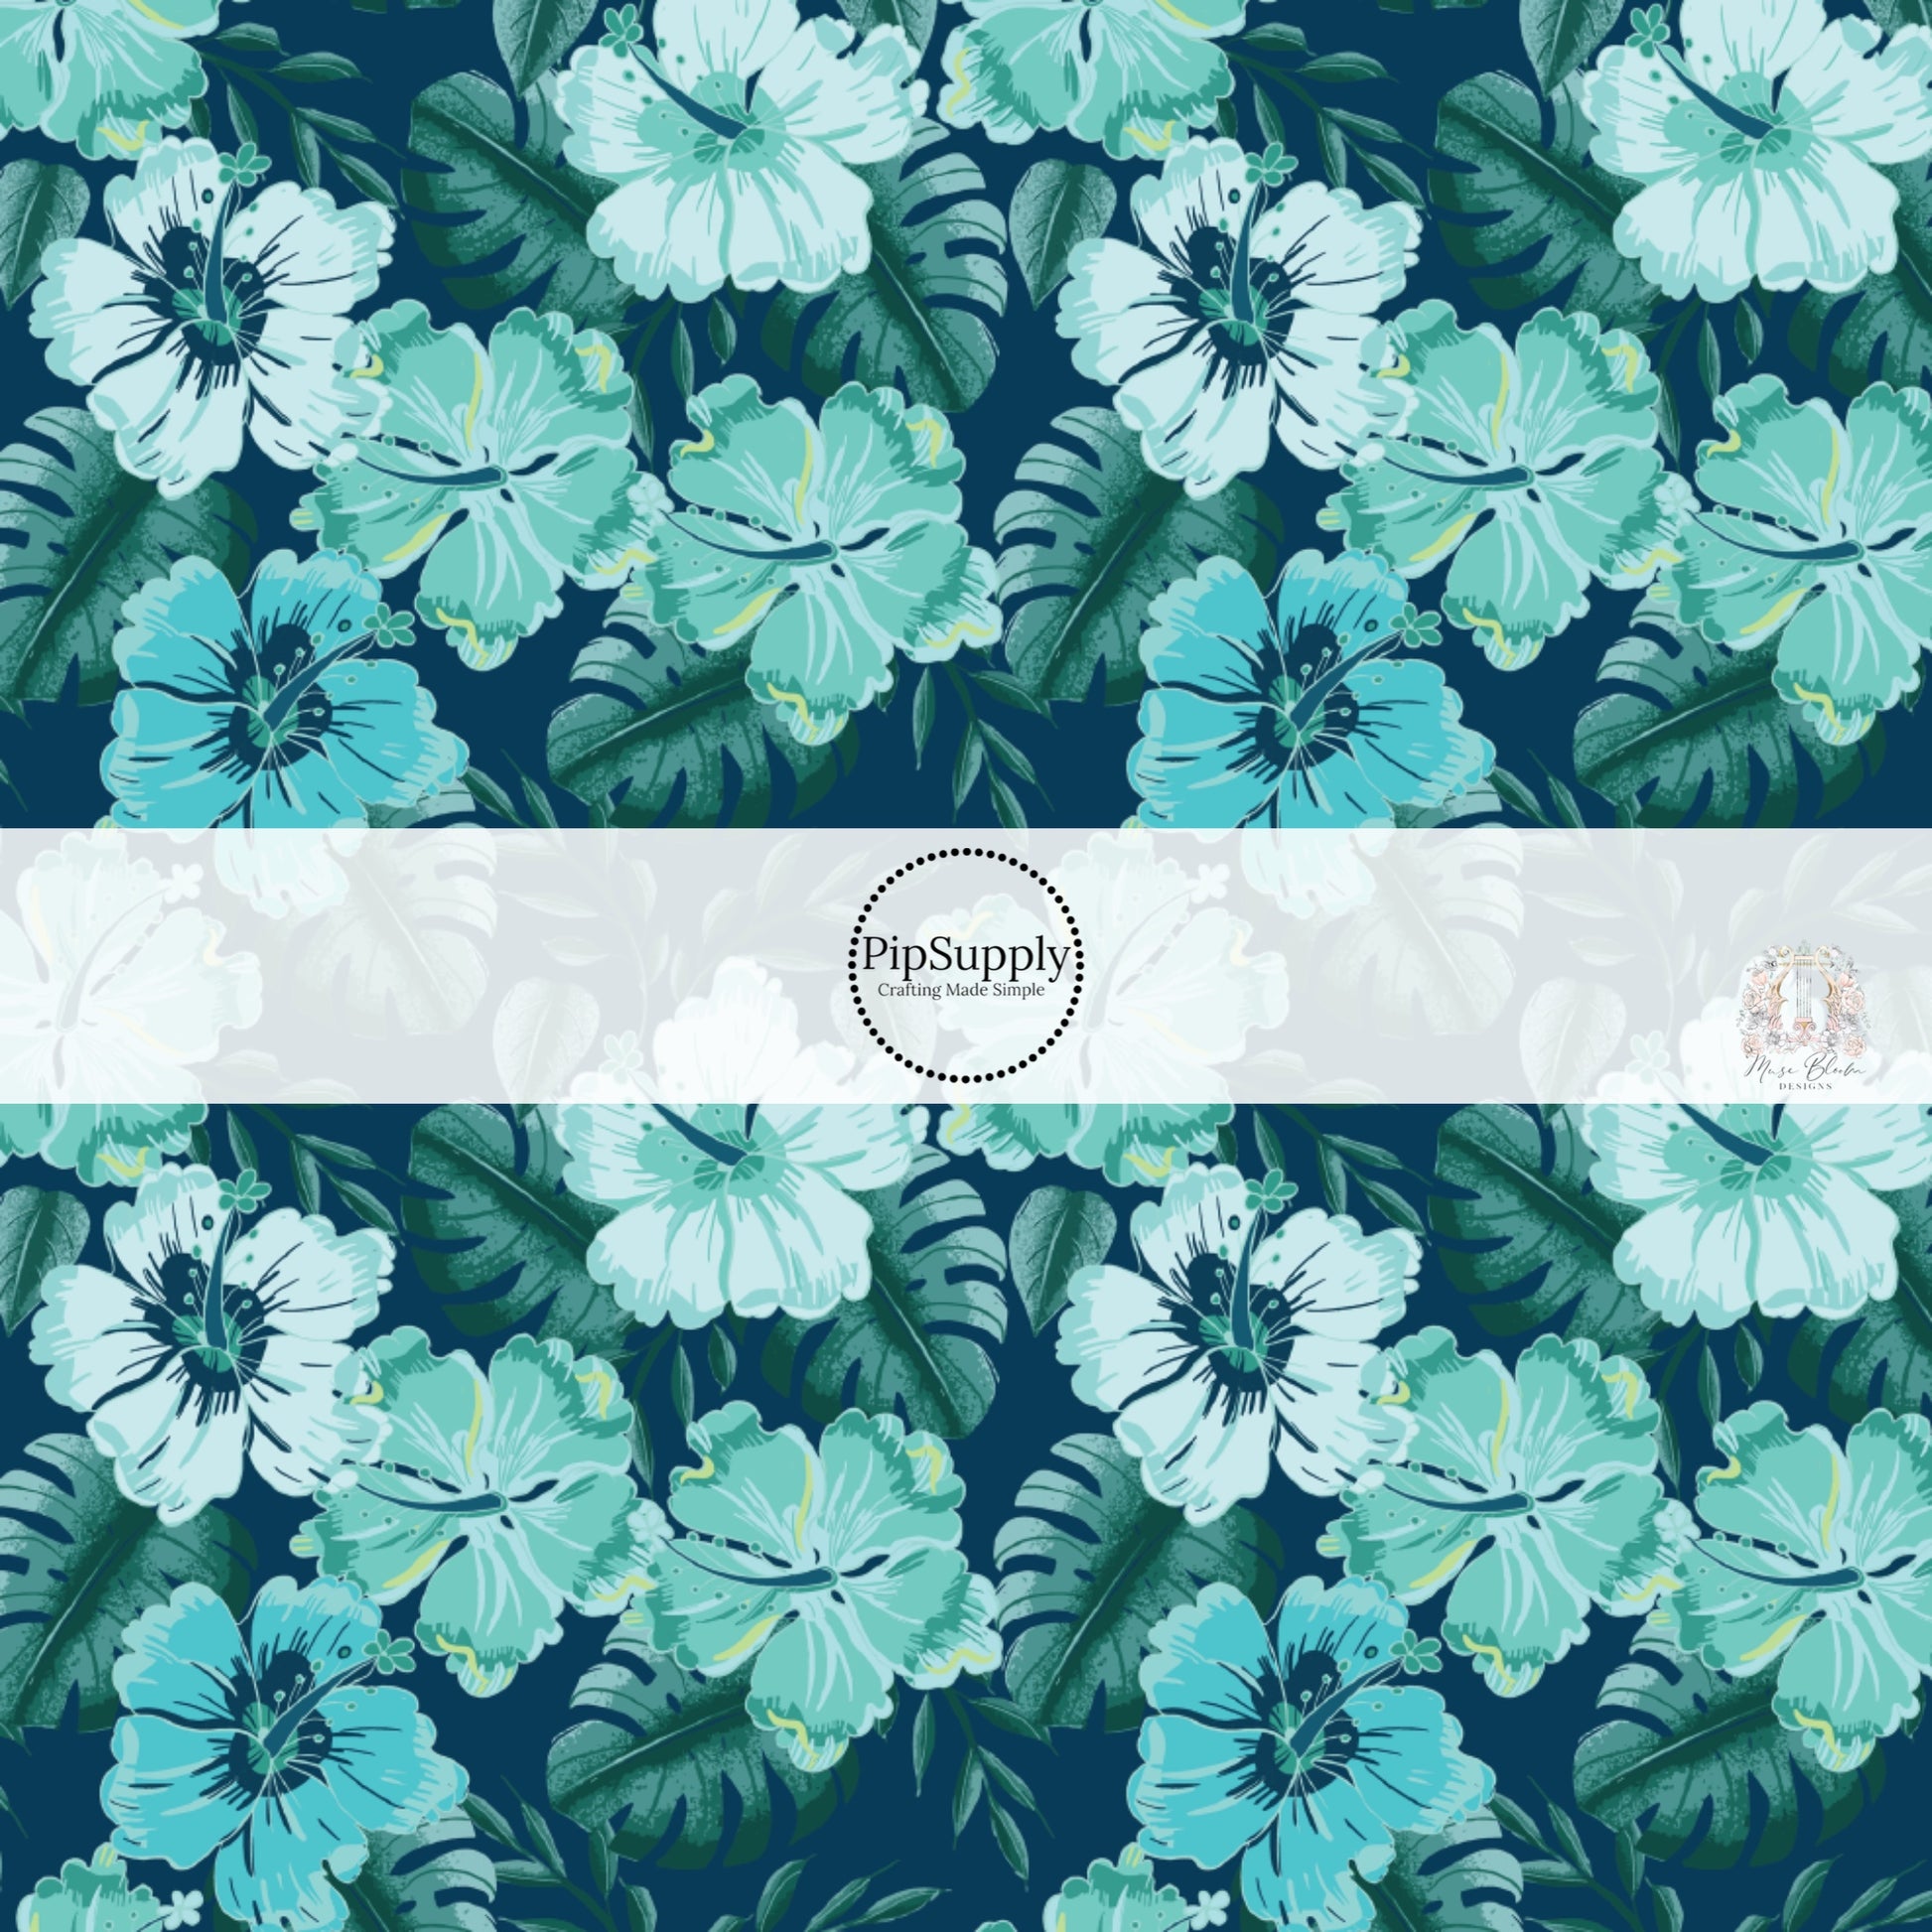 Light blue and aqua tropical flowers and palms on dark navy hair bow strips. 